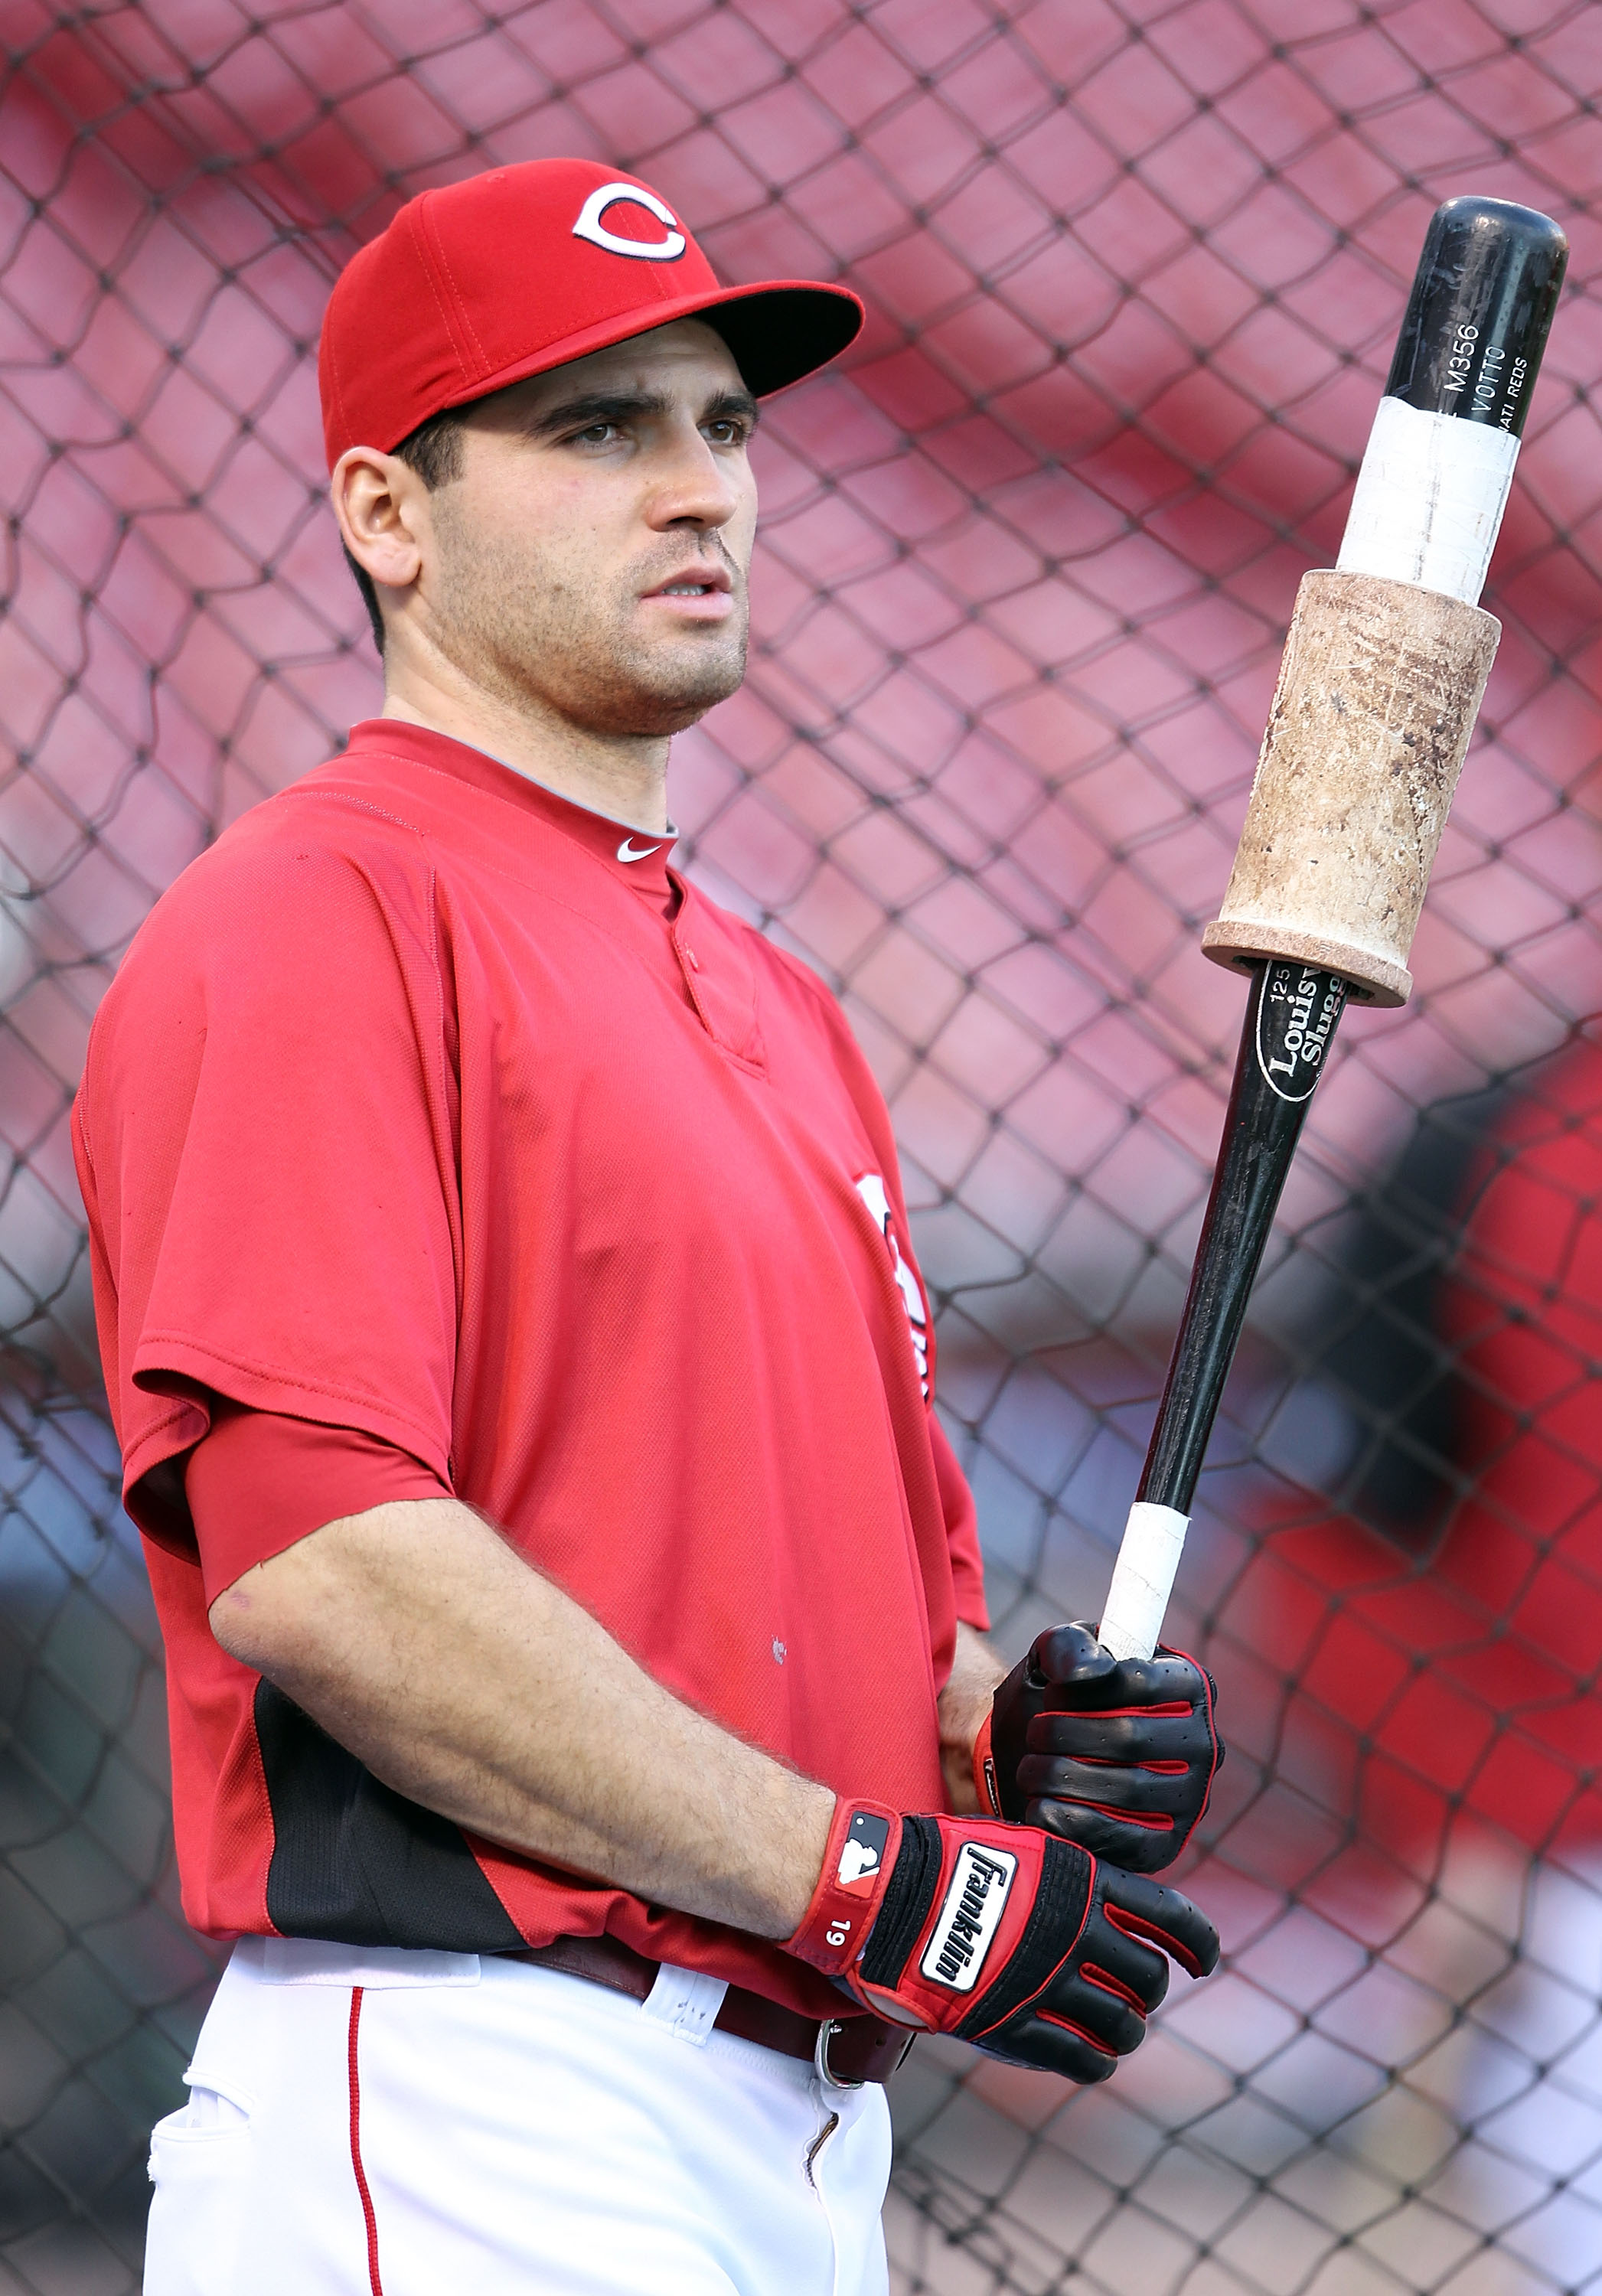 CINCINNATI - OCTOBER 10: Joey Votto #19 of the Cincinnati Reds participates in batting practice before the start of  Game 3 of the NLDS against the Philadelphia Phillies  at Great American Ball Park on October 10, 2010 in Cincinnati, Ohio.  (Photo by Andy